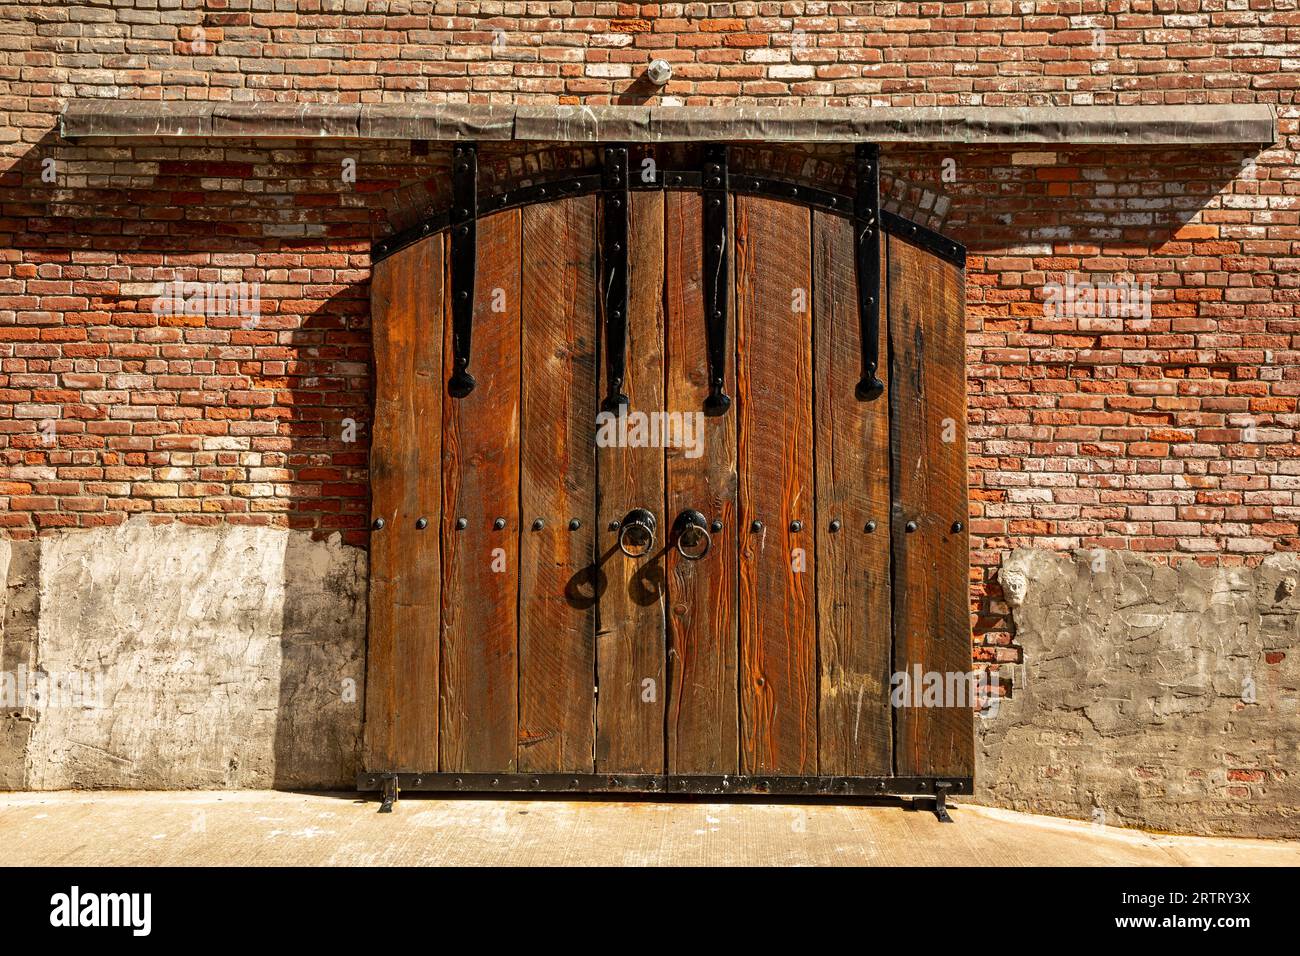 WA23626-00...WASHINGTON - Solid doors on an empty building on the shores of Port Townsend Bay in the town of Port Townsend. Stock Photo